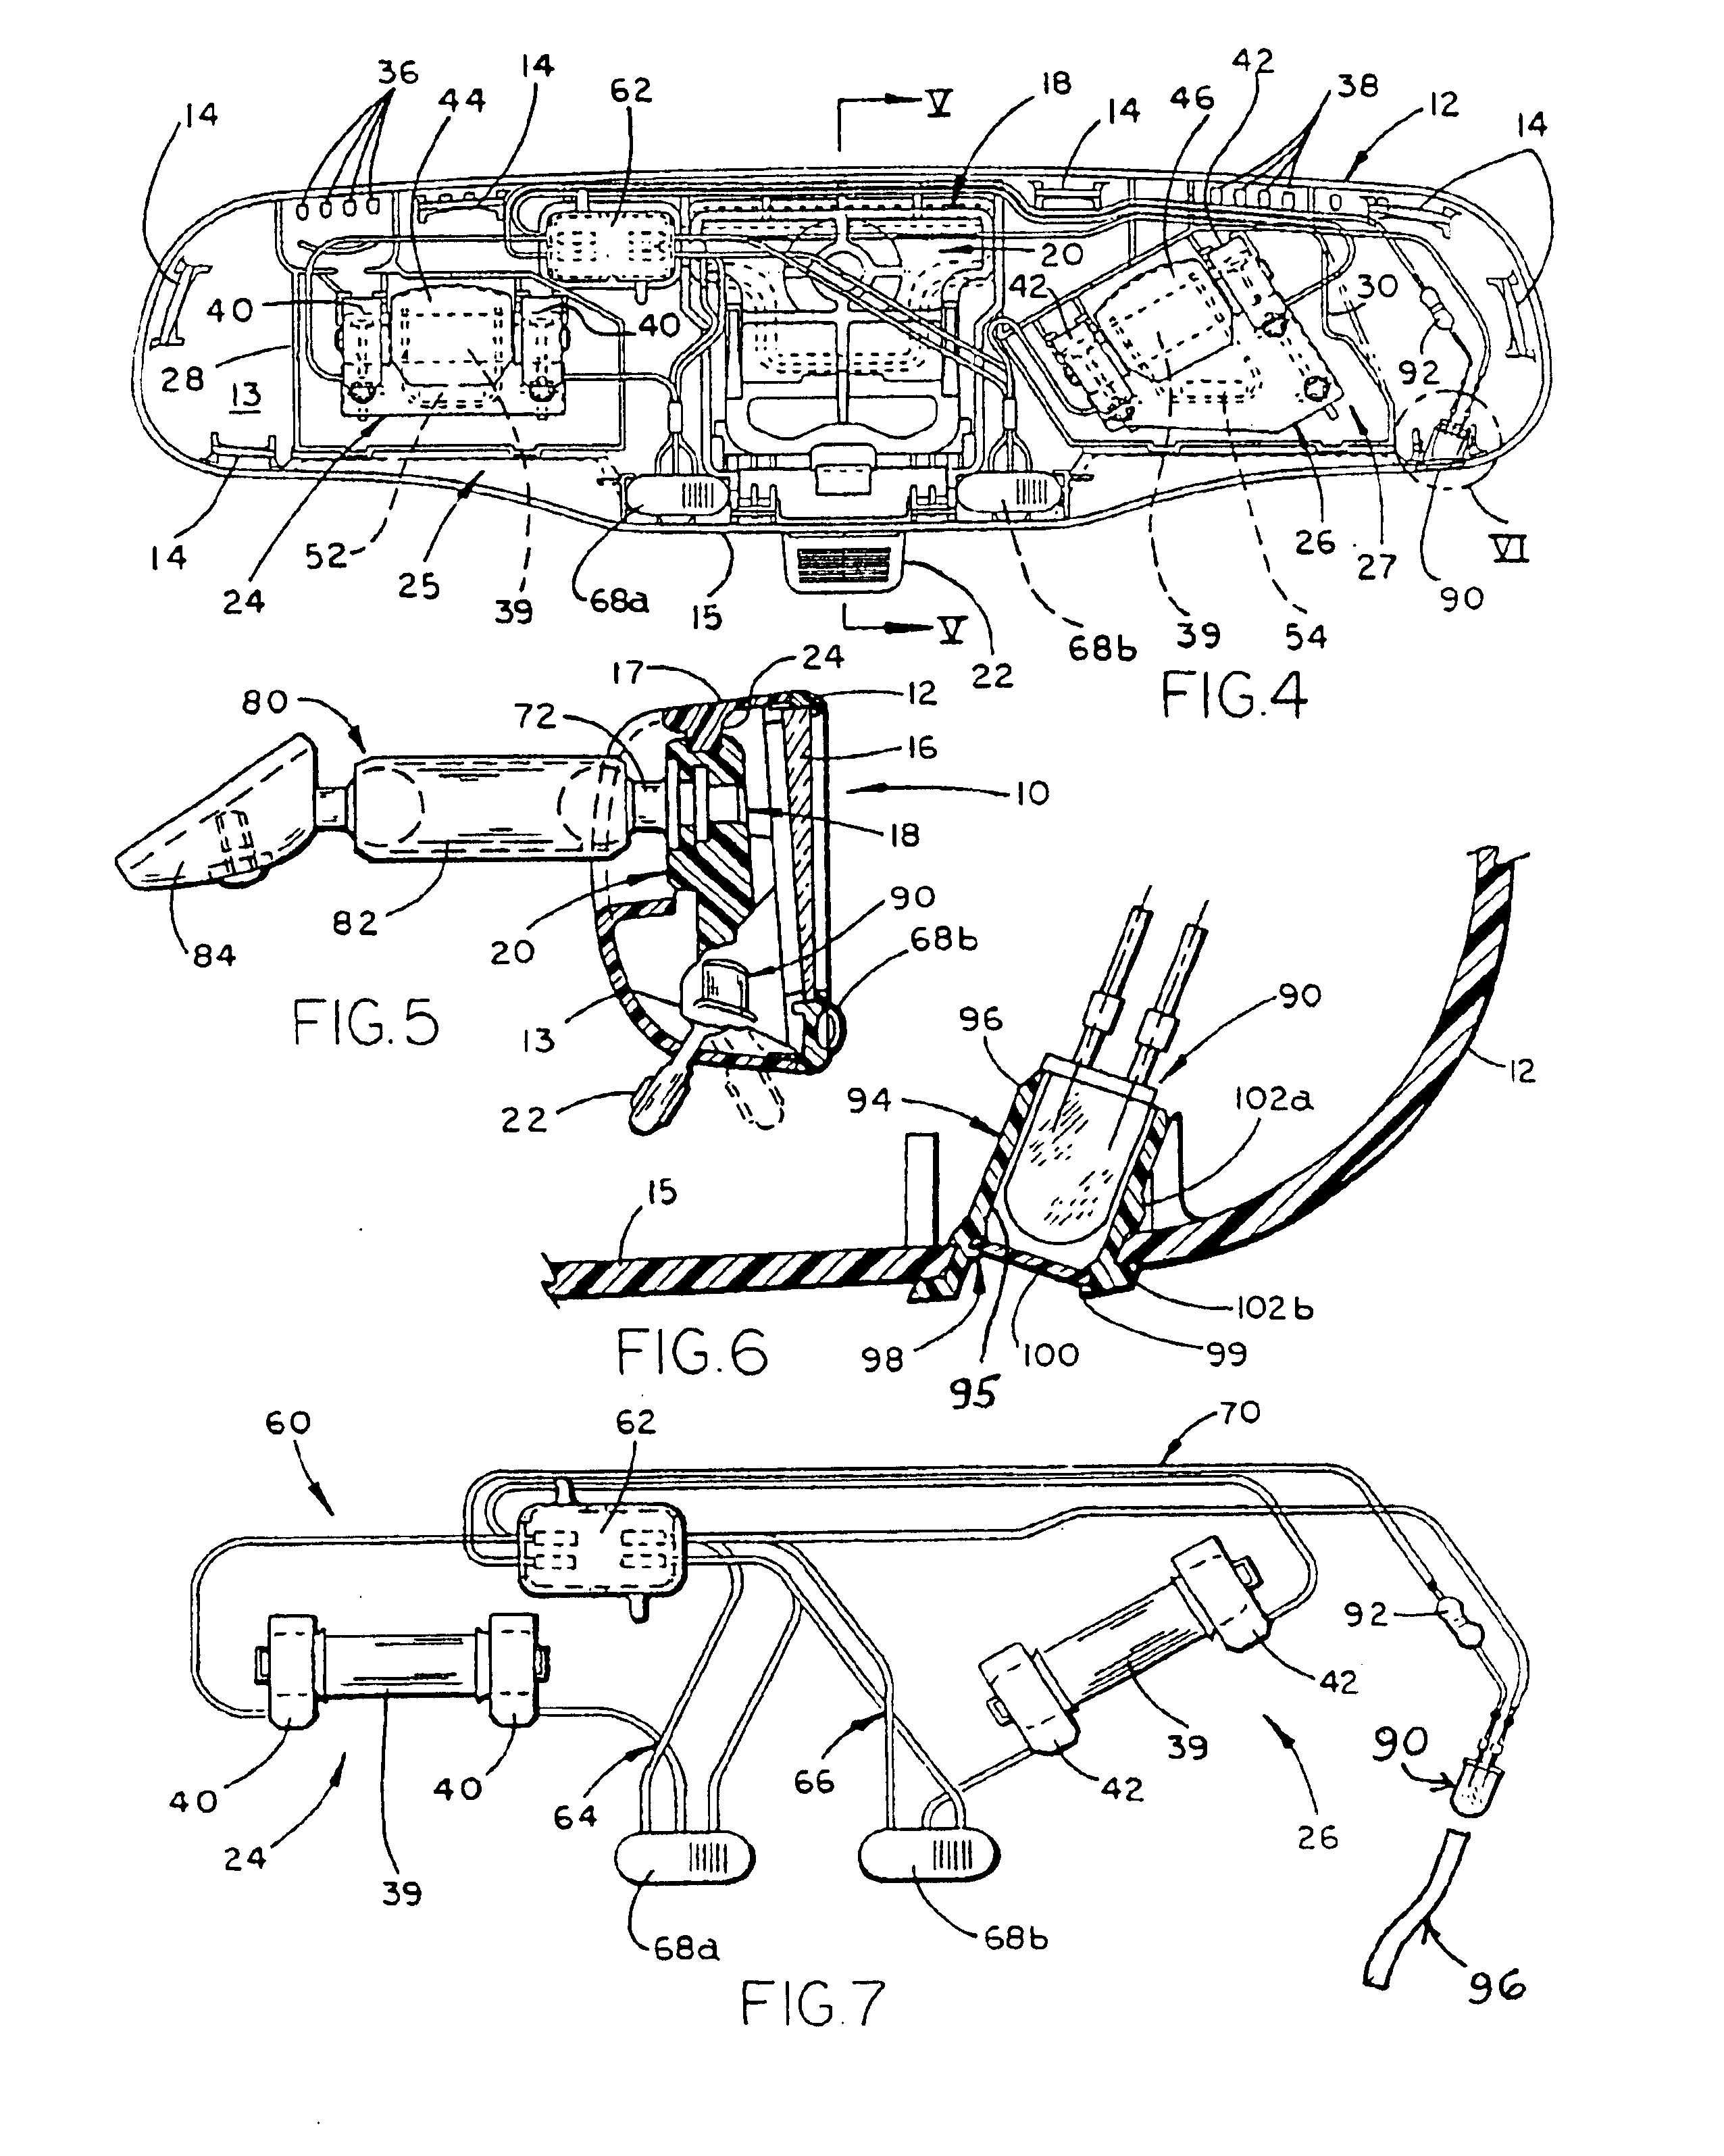 Interior mirror assembly for a vehicle incorporating a solid-state light source